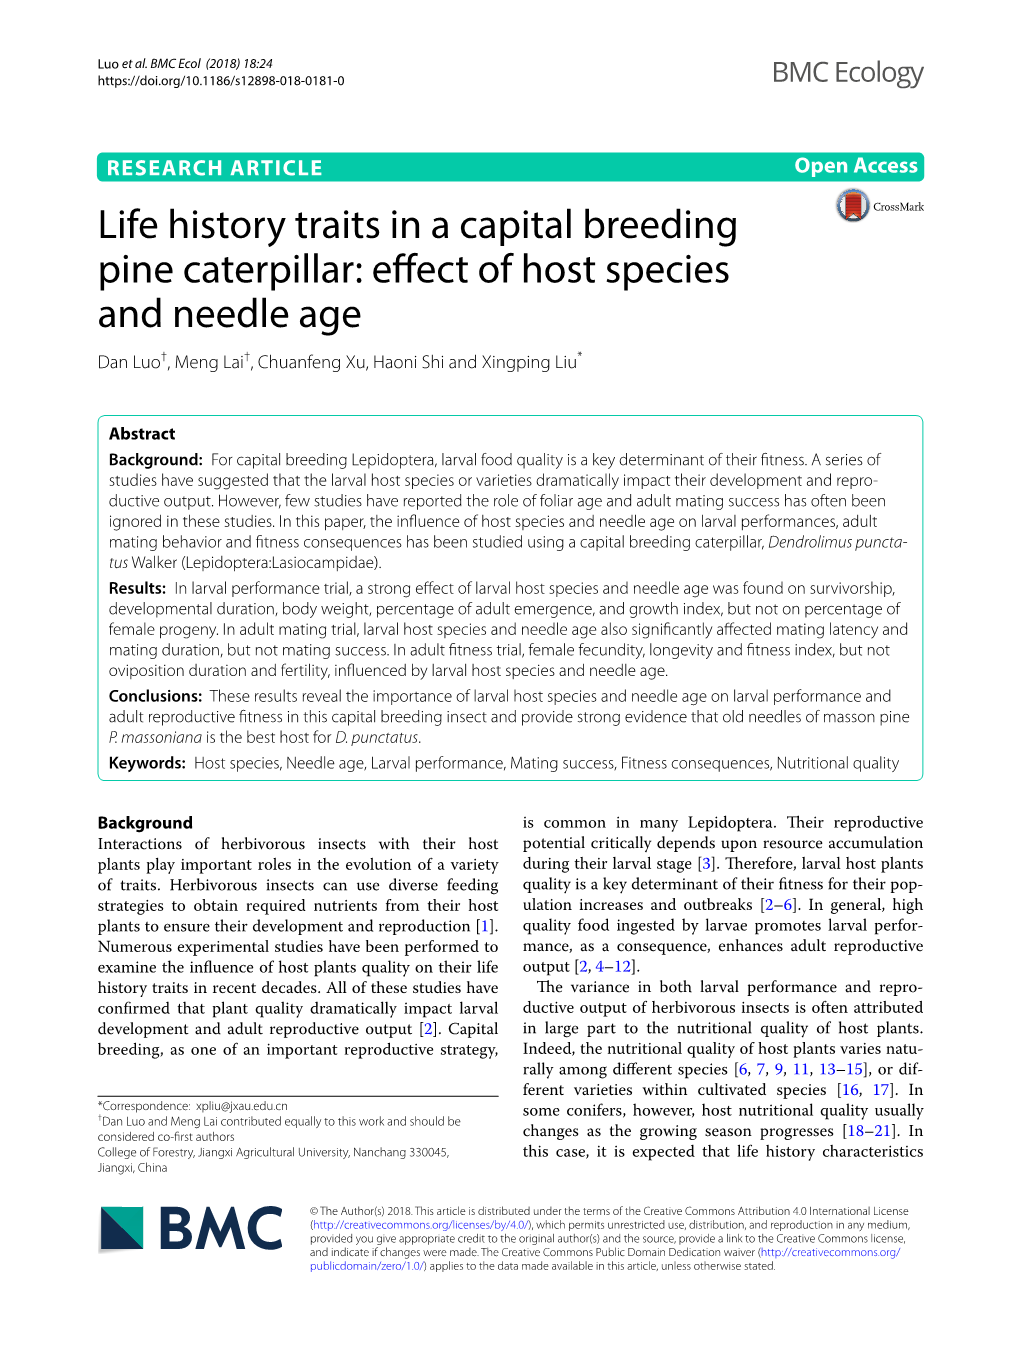 Life History Traits in a Capital Breeding Pine Caterpillar: Effect of Host